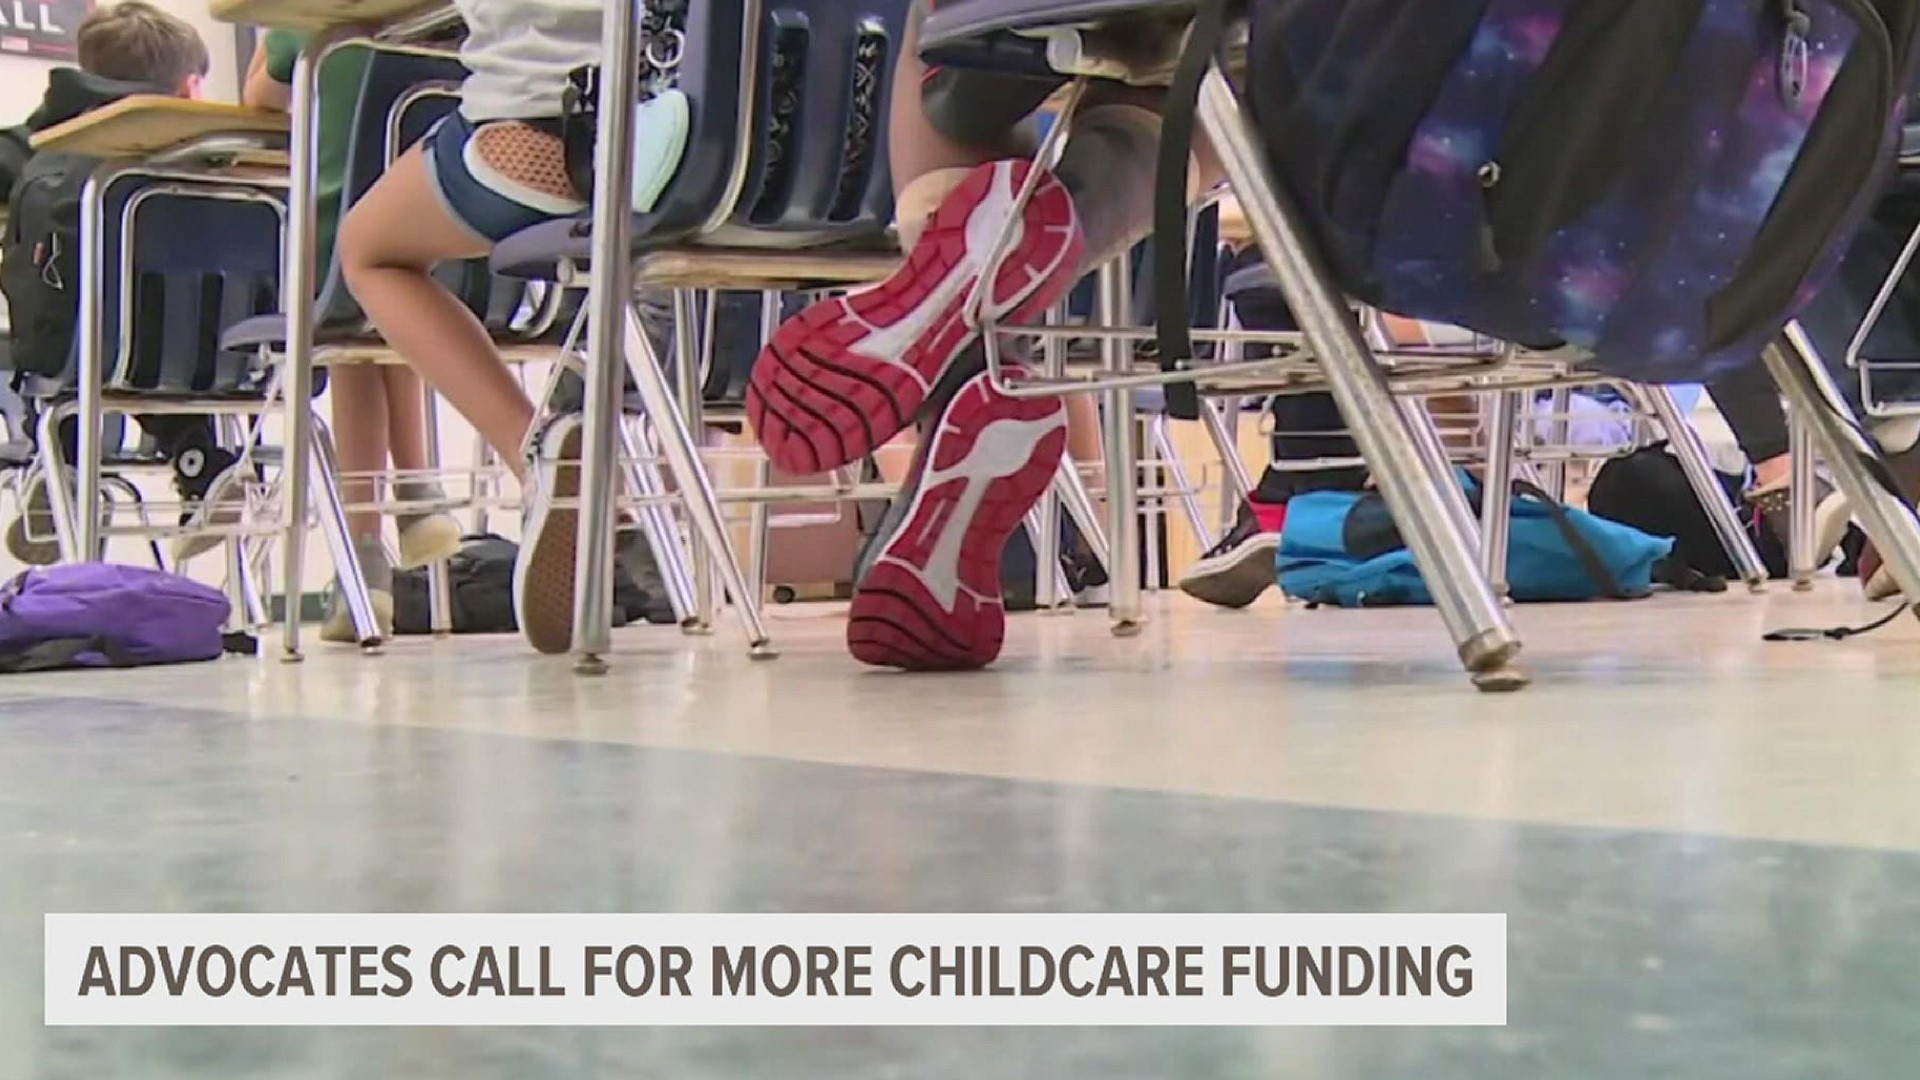 Advocates say thousands of children are missing out on childcare programs due to low wages for staff